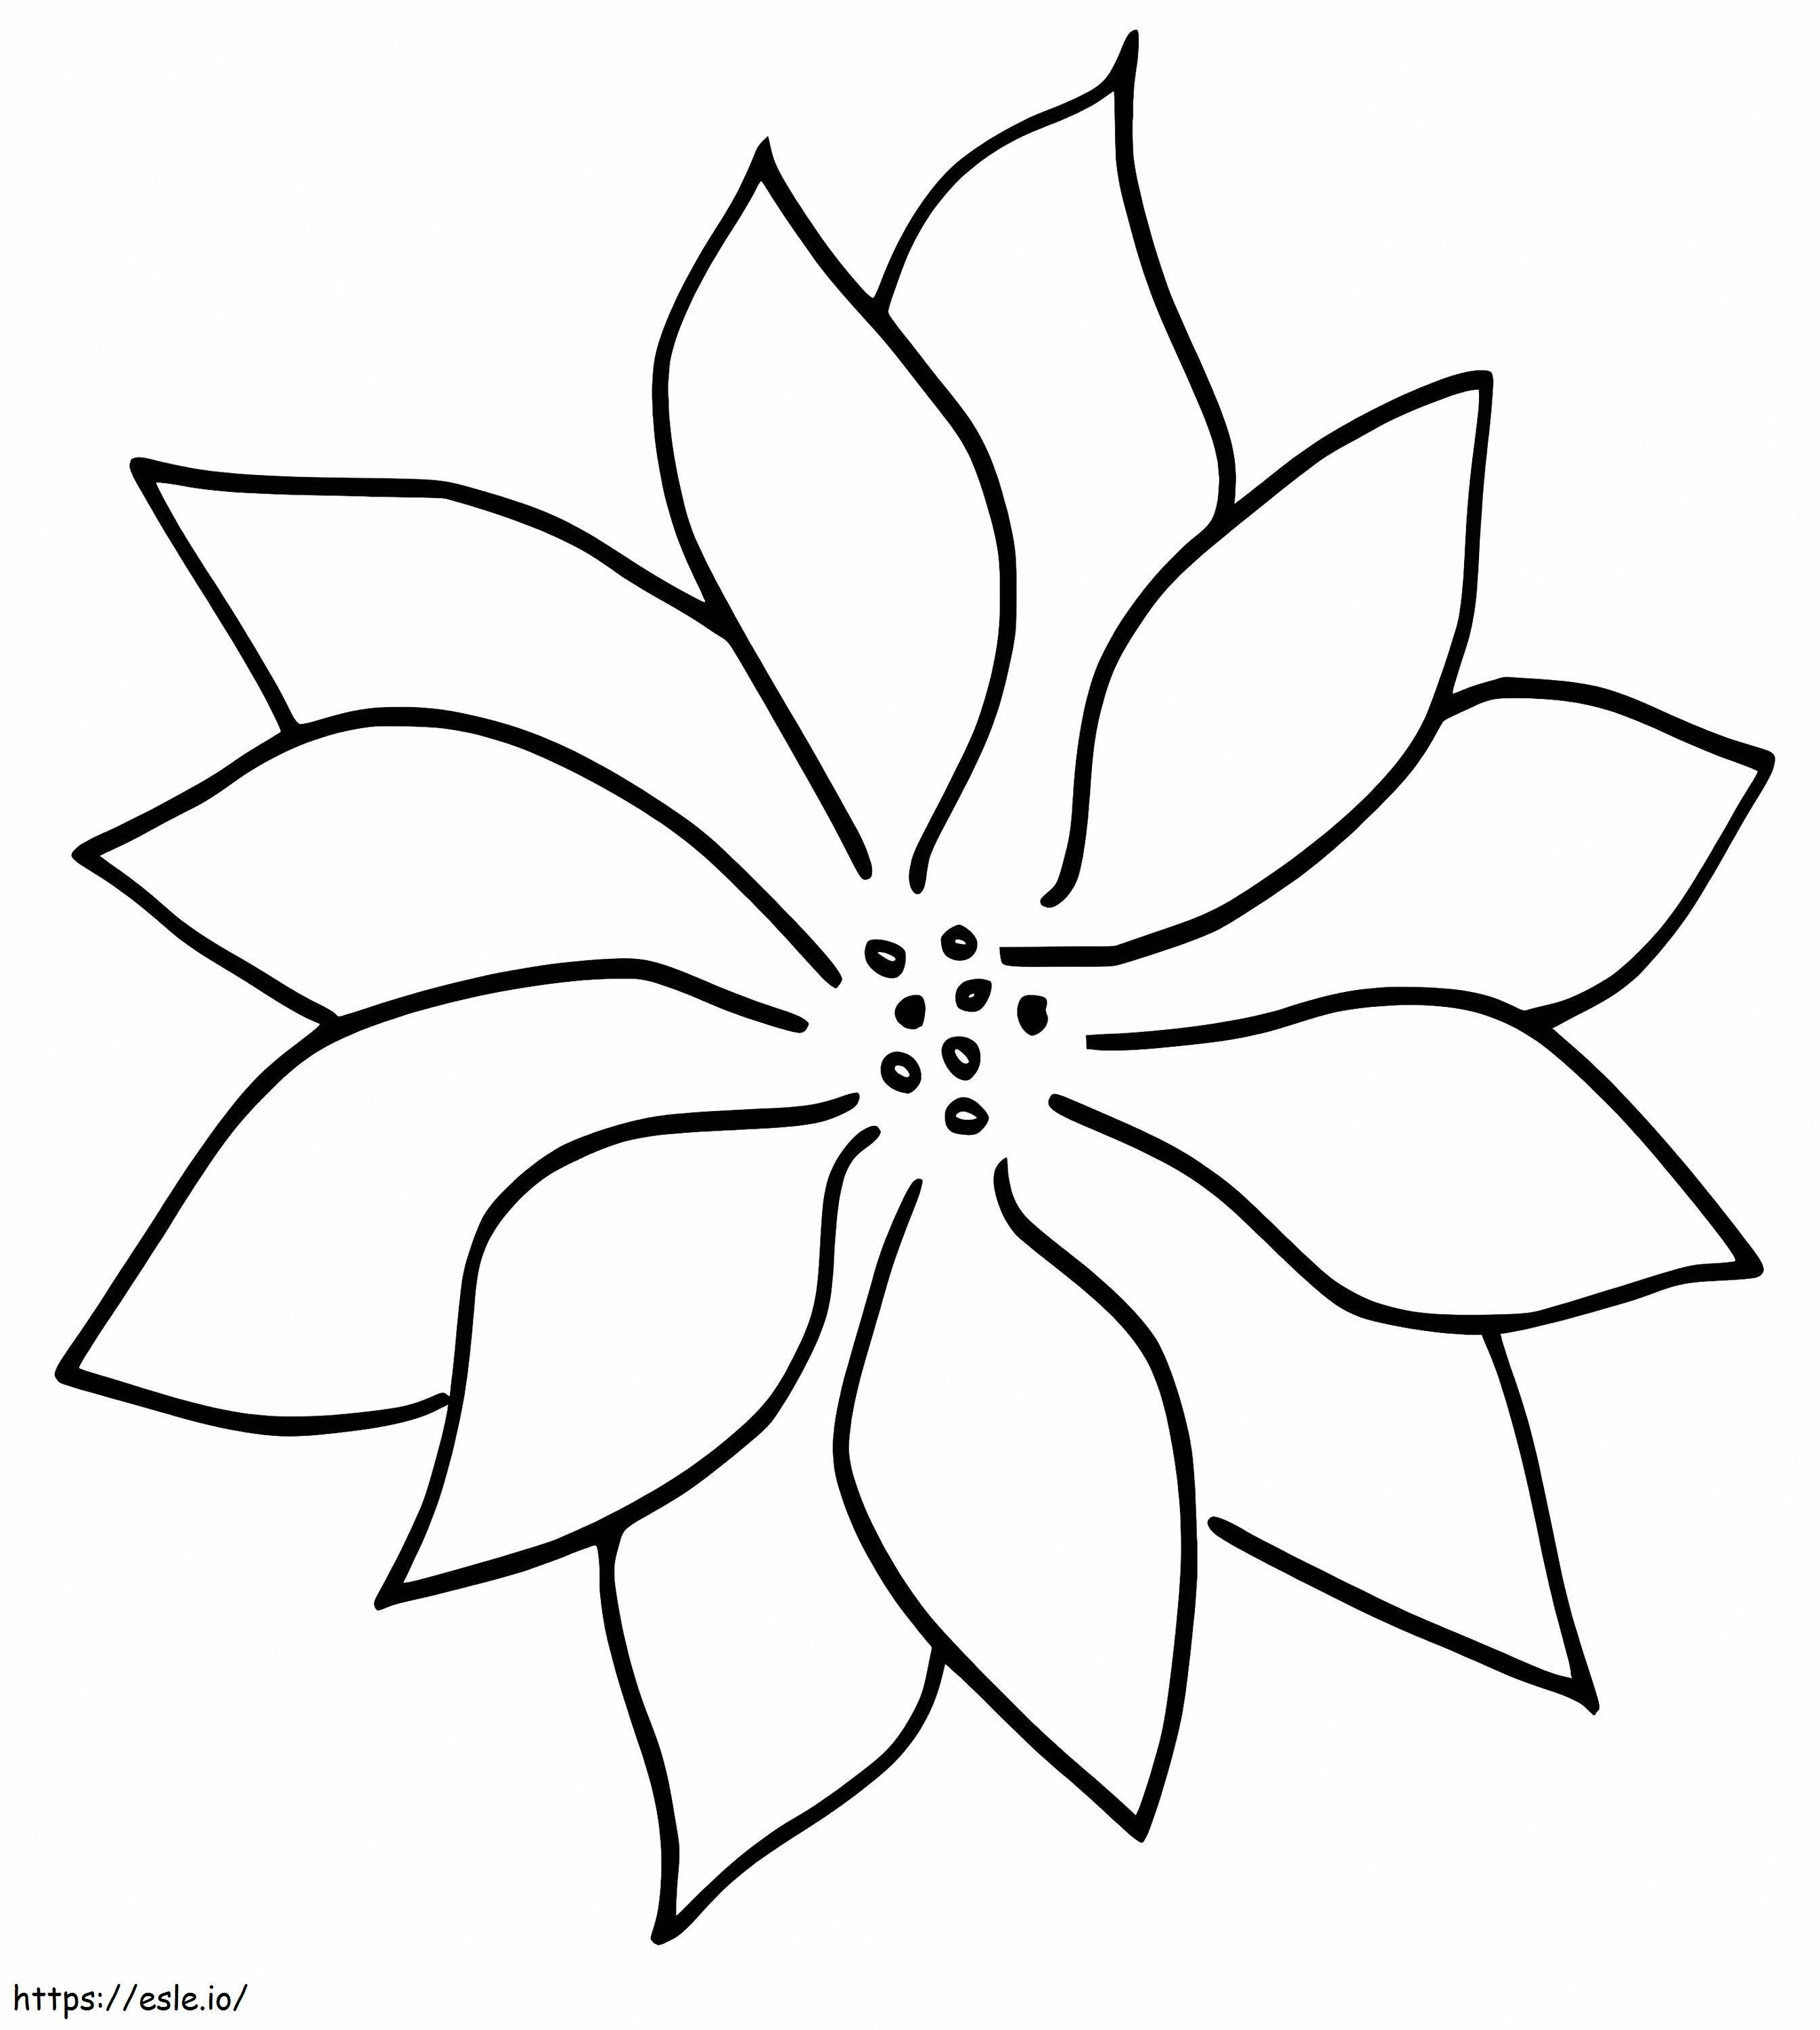 Printable Christmas Poinsettia coloring page